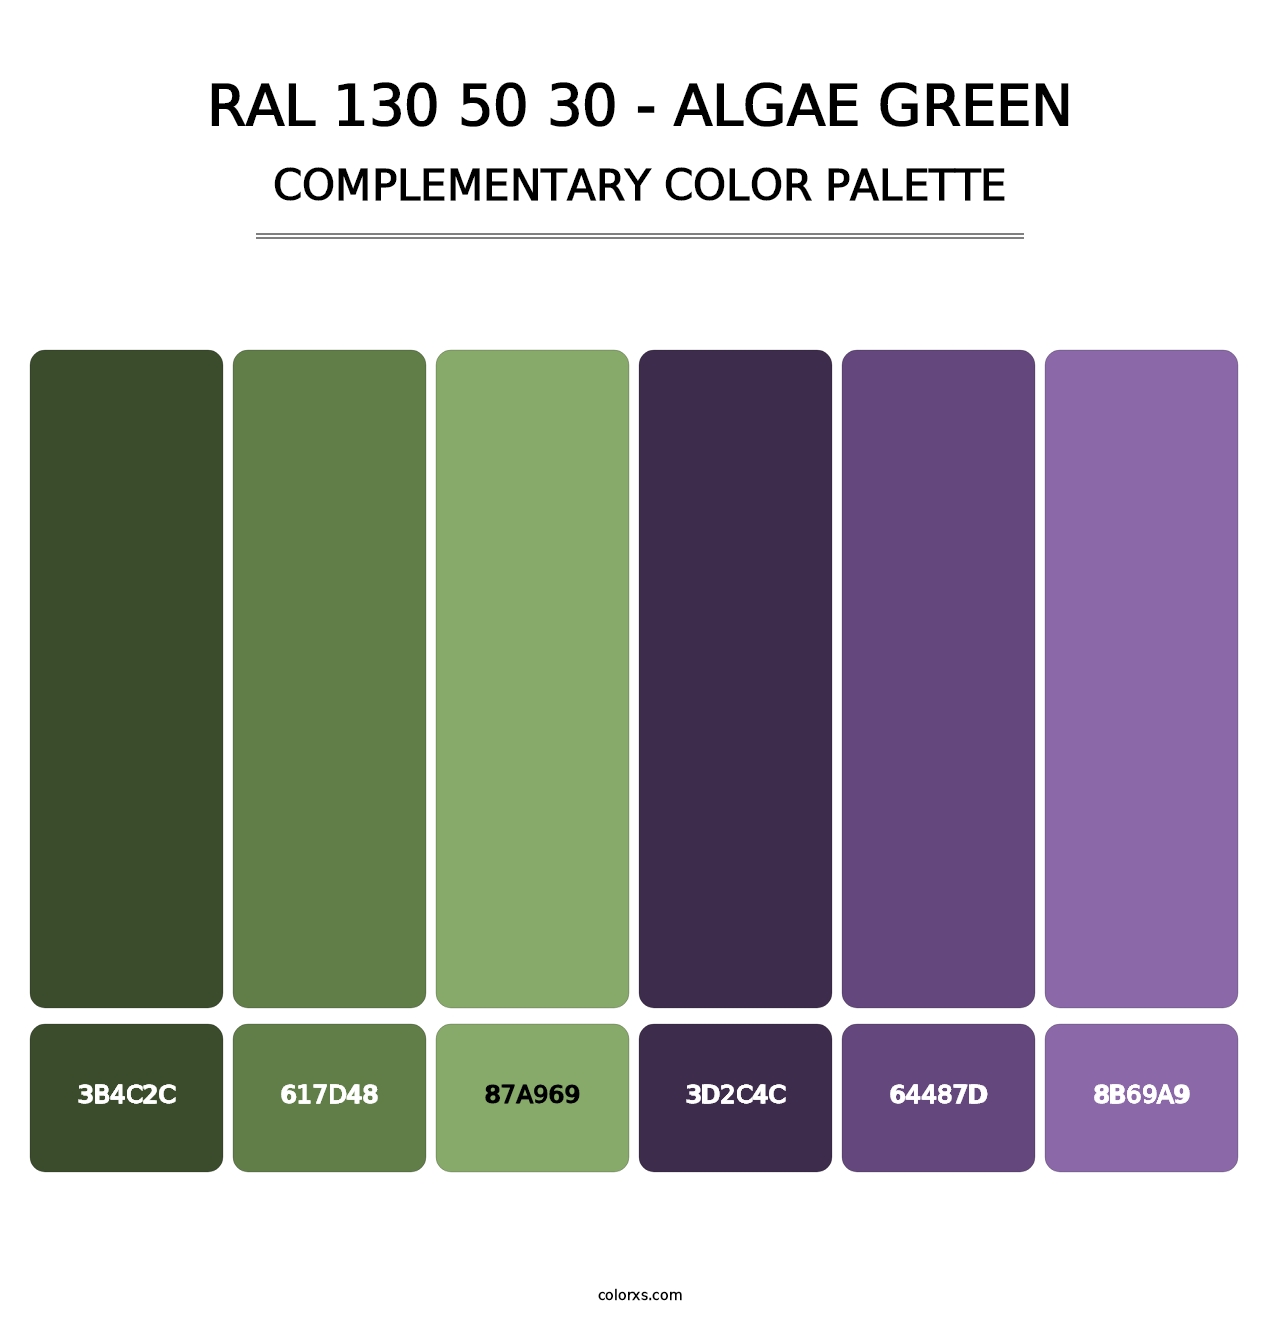 RAL 130 50 30 - Algae Green - Complementary Color Palette